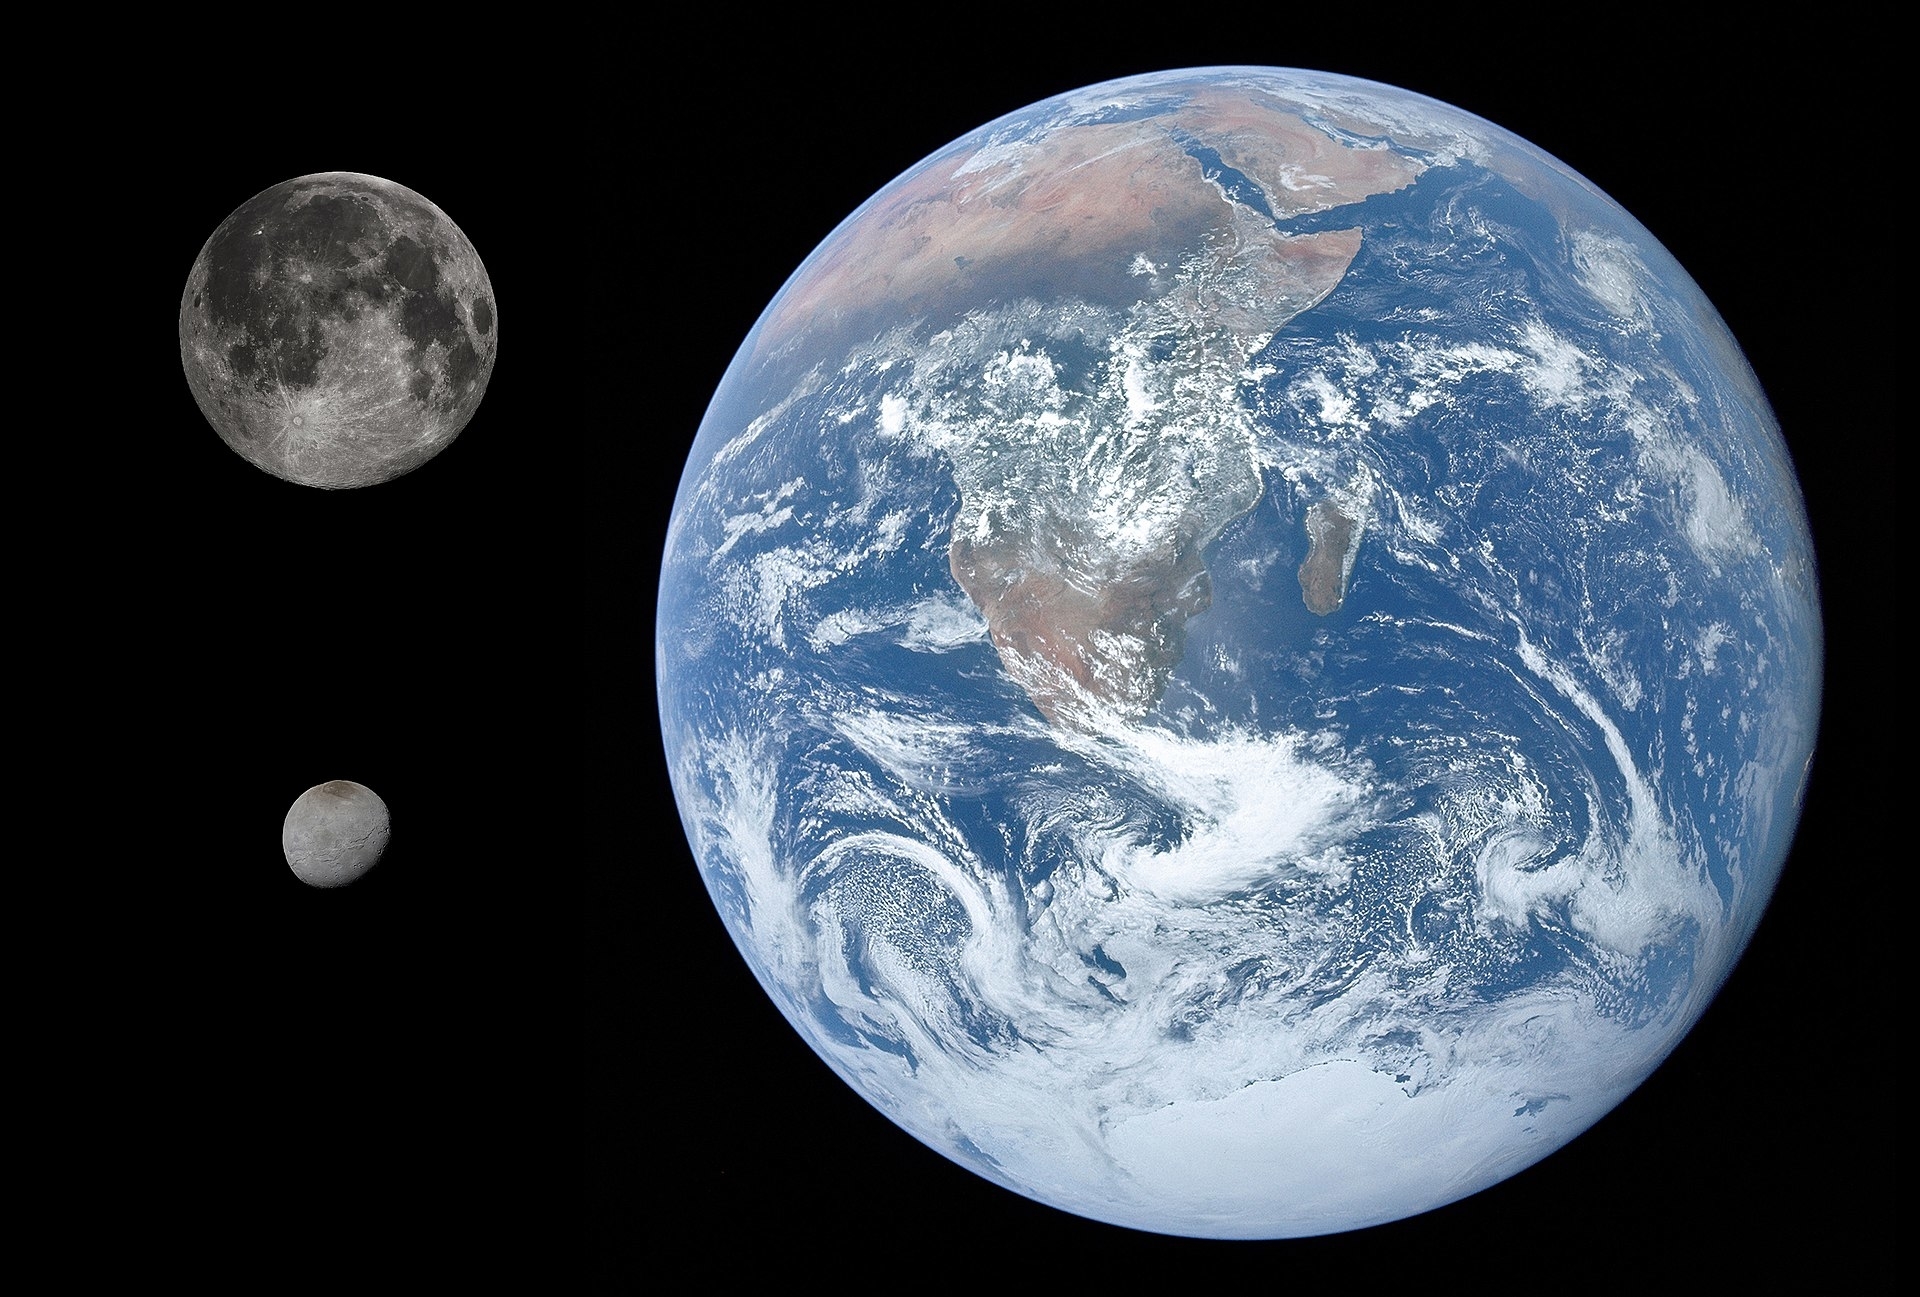 Composite image showing Earth, the Moon, and a second smaller moon against a black space background